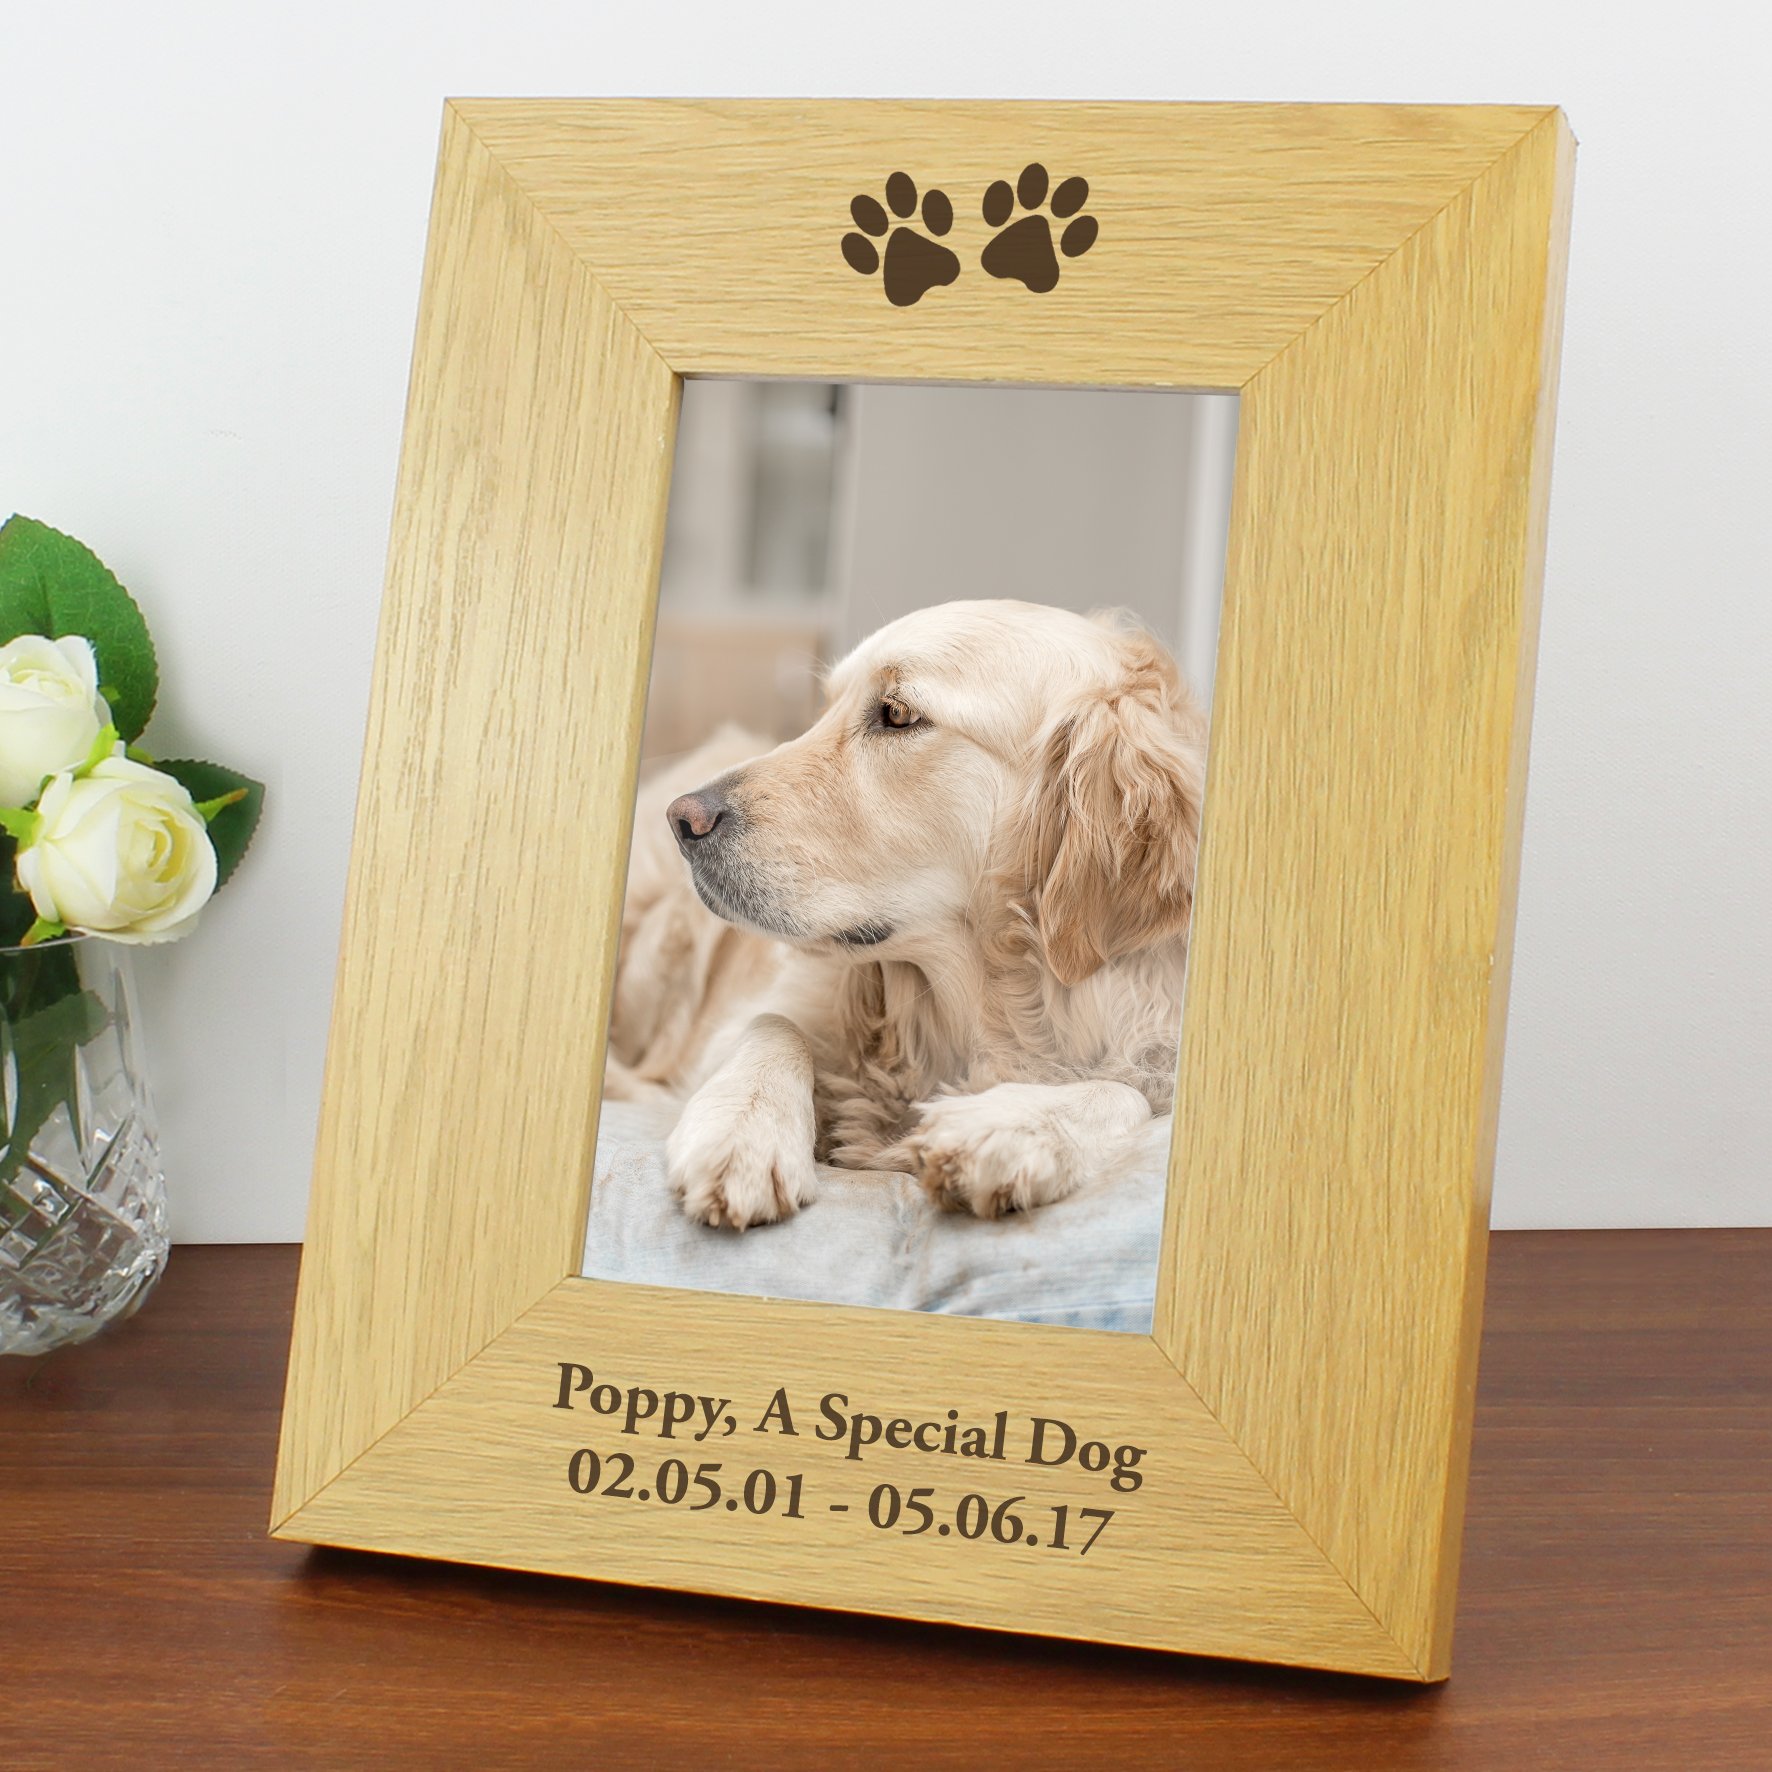 Personalised Paw Prints Wooden Photo Frame